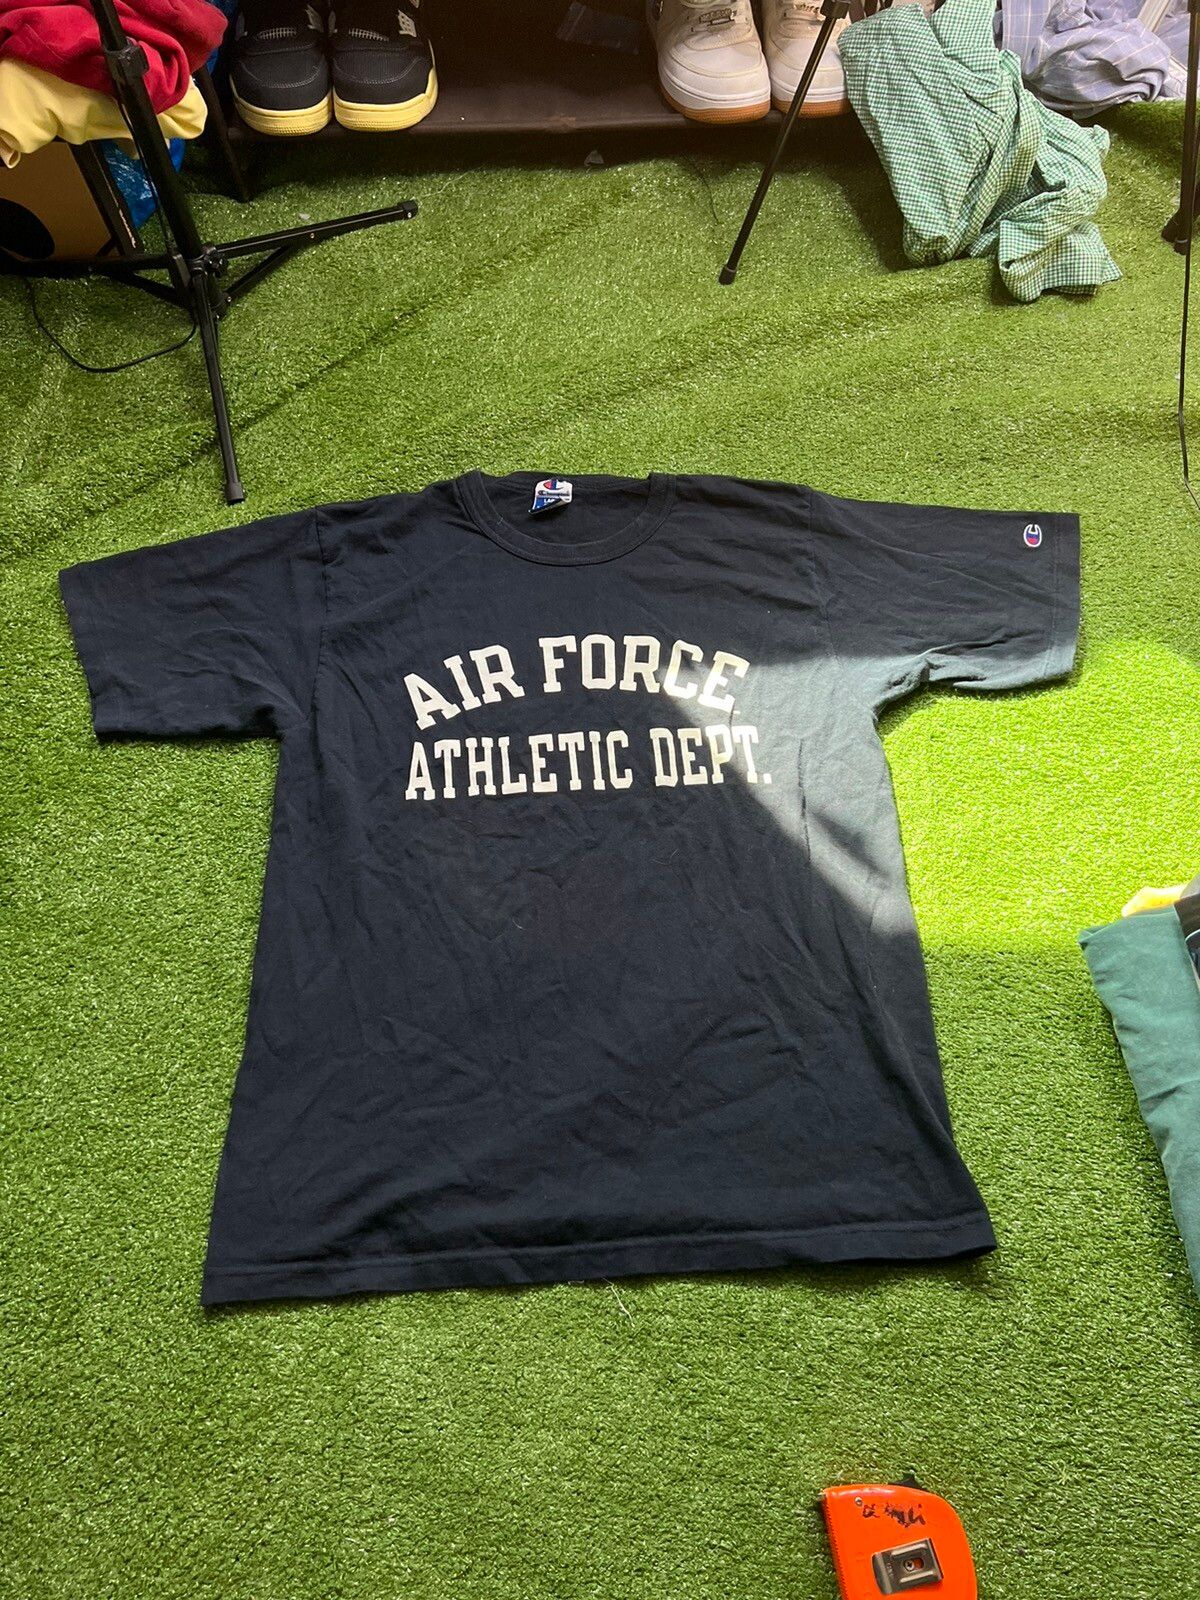 Vintage vintage air force athletic dept champion made in usa shirt Size US L / EU 52-54 / 3 - 1 Preview